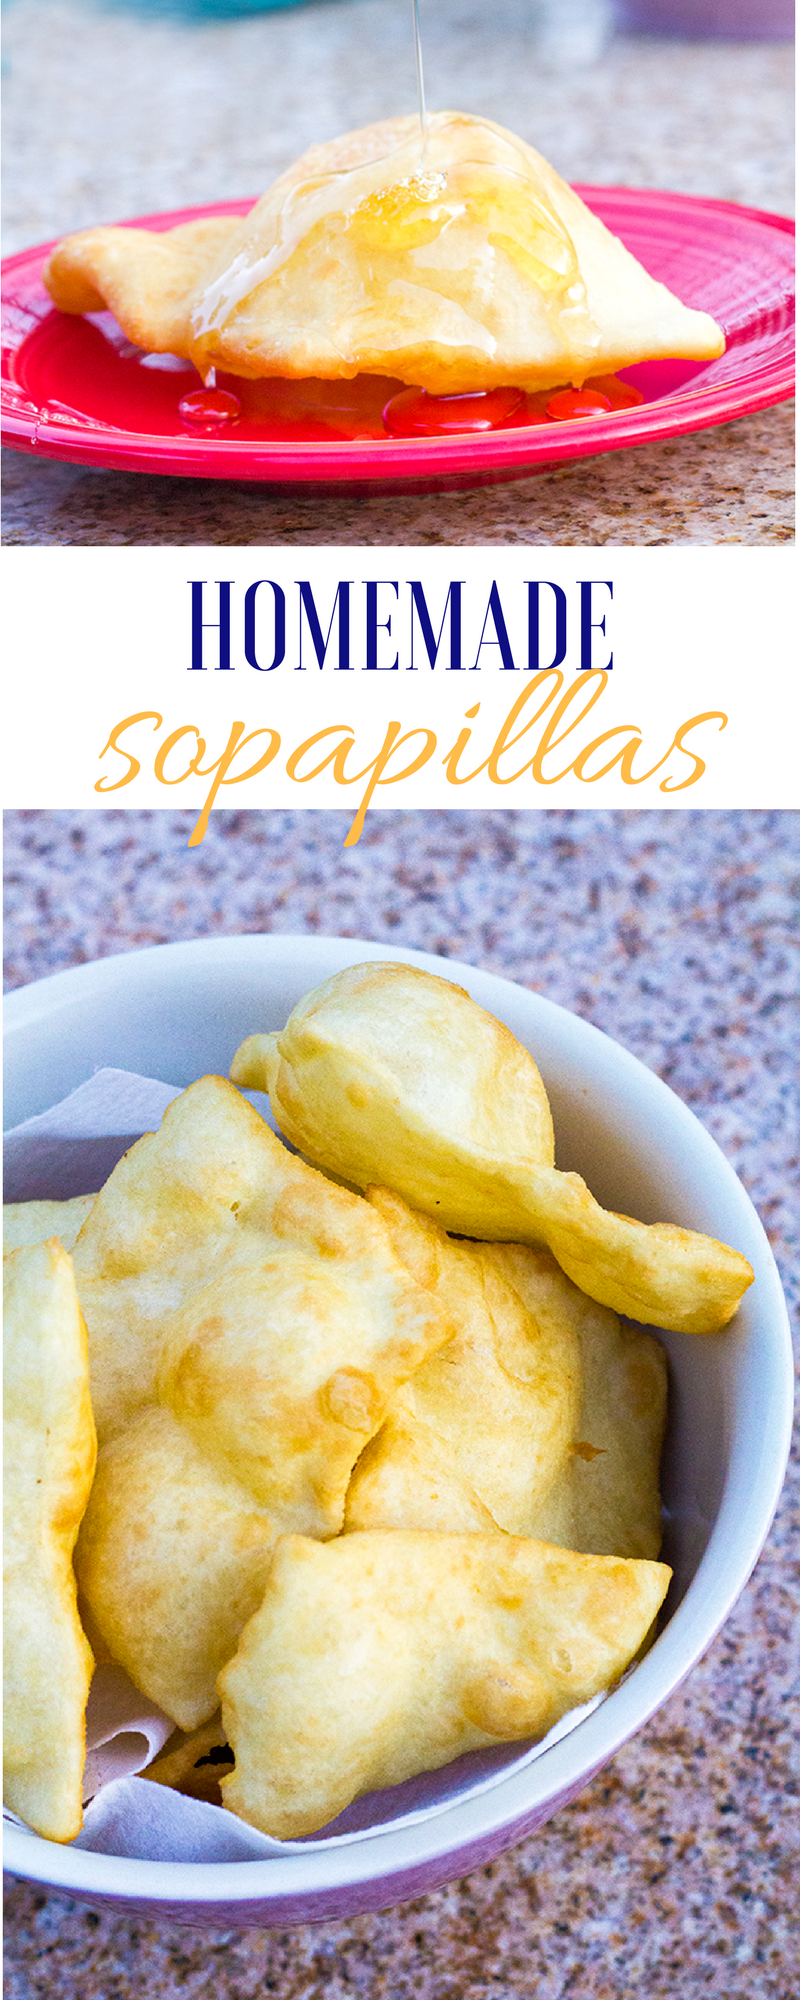 How to Make Sopapillas | NewMexicanFoodie.com